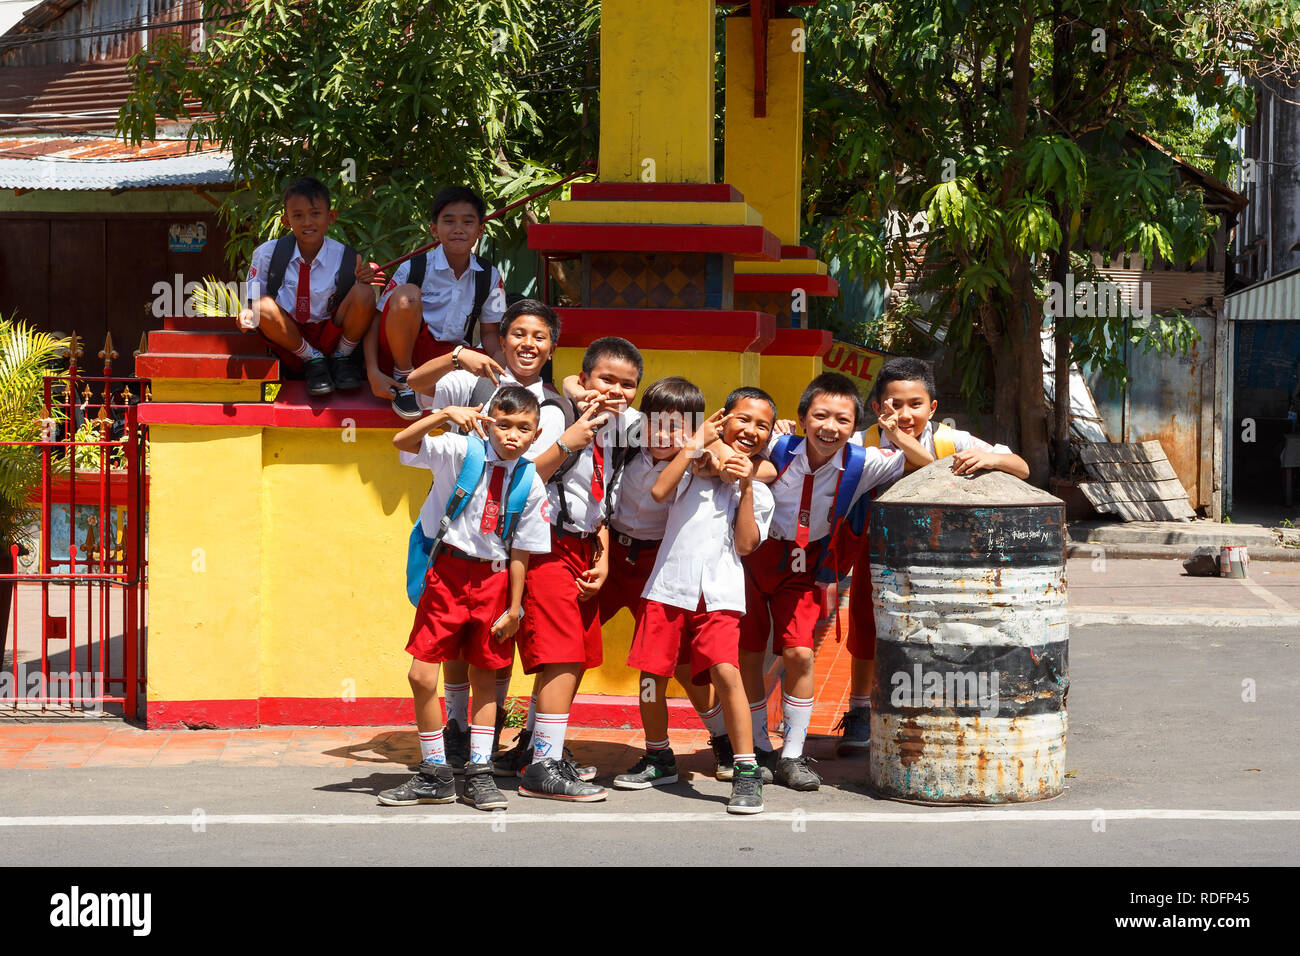 Manado, Indonesia - August 04 2015: Group of young students in uniform pose for tourist in street of Manado on North Sulawesi. Stock Photo